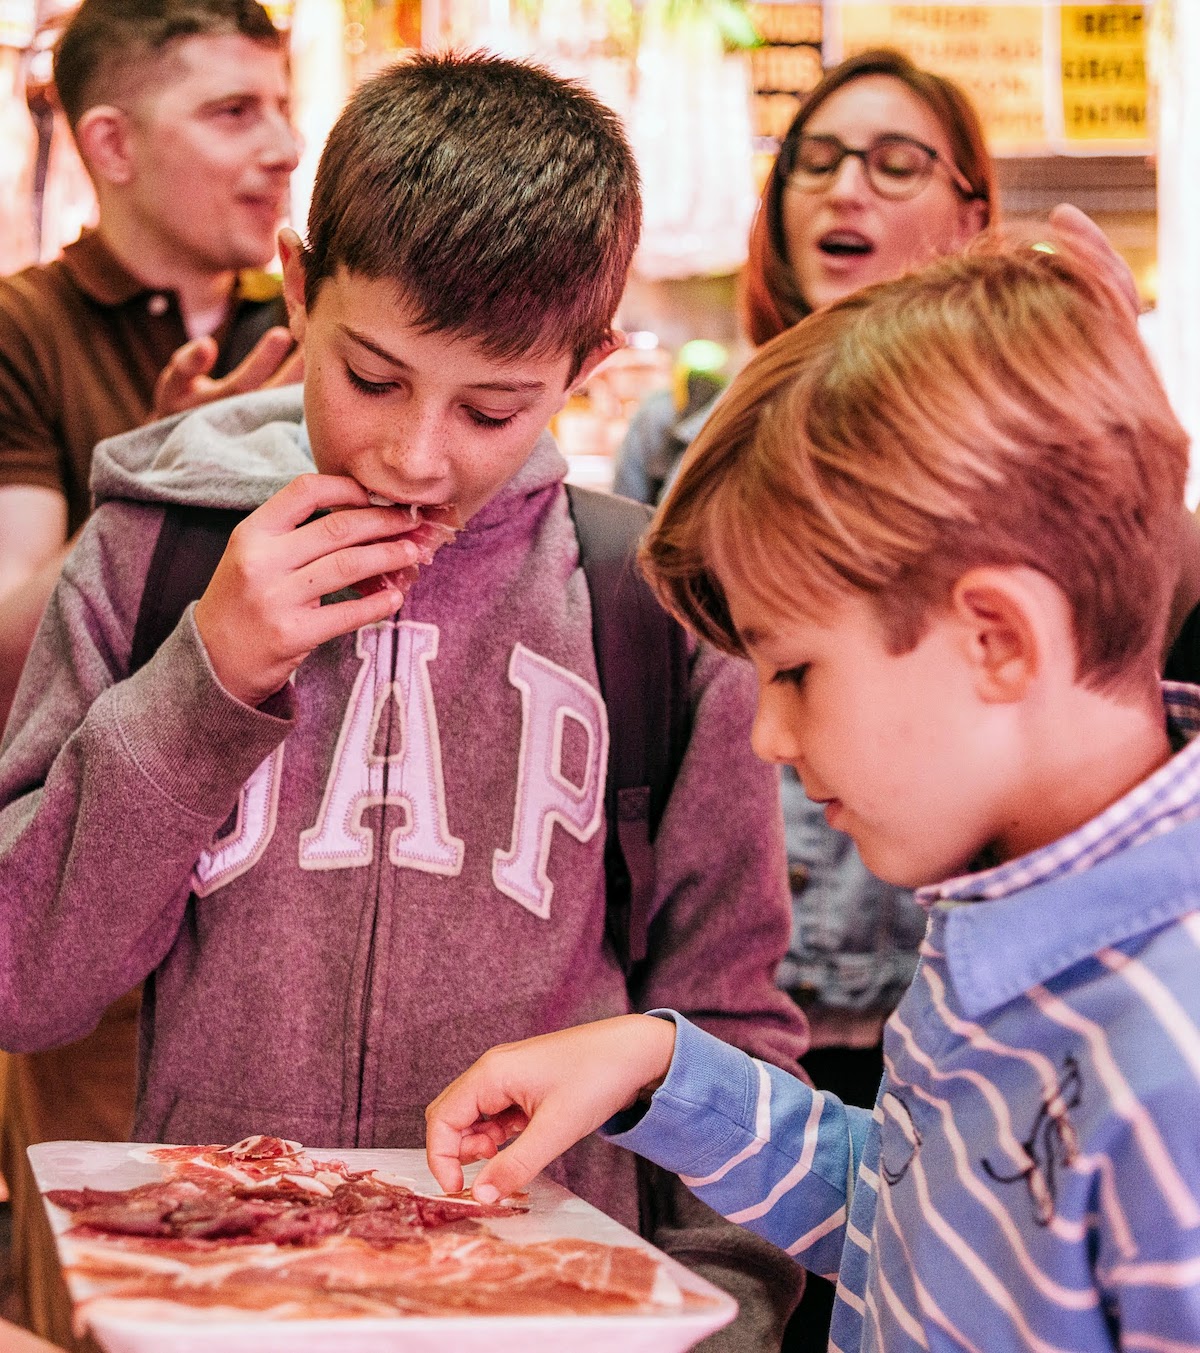 Two boys eating Spanish cured ham off of a white tray